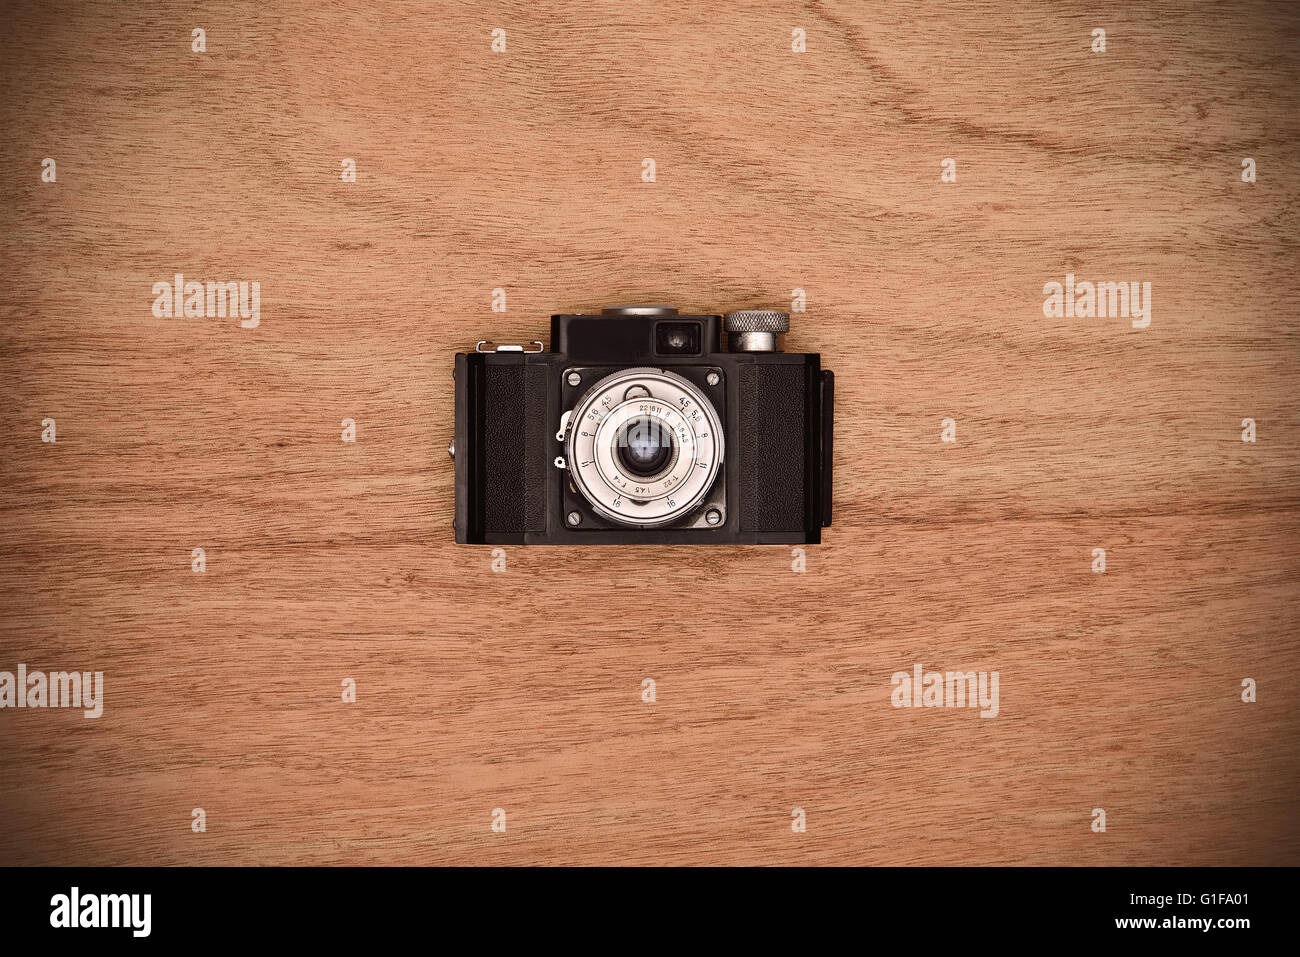 retro vintage camera on a wooden table Stock Photo